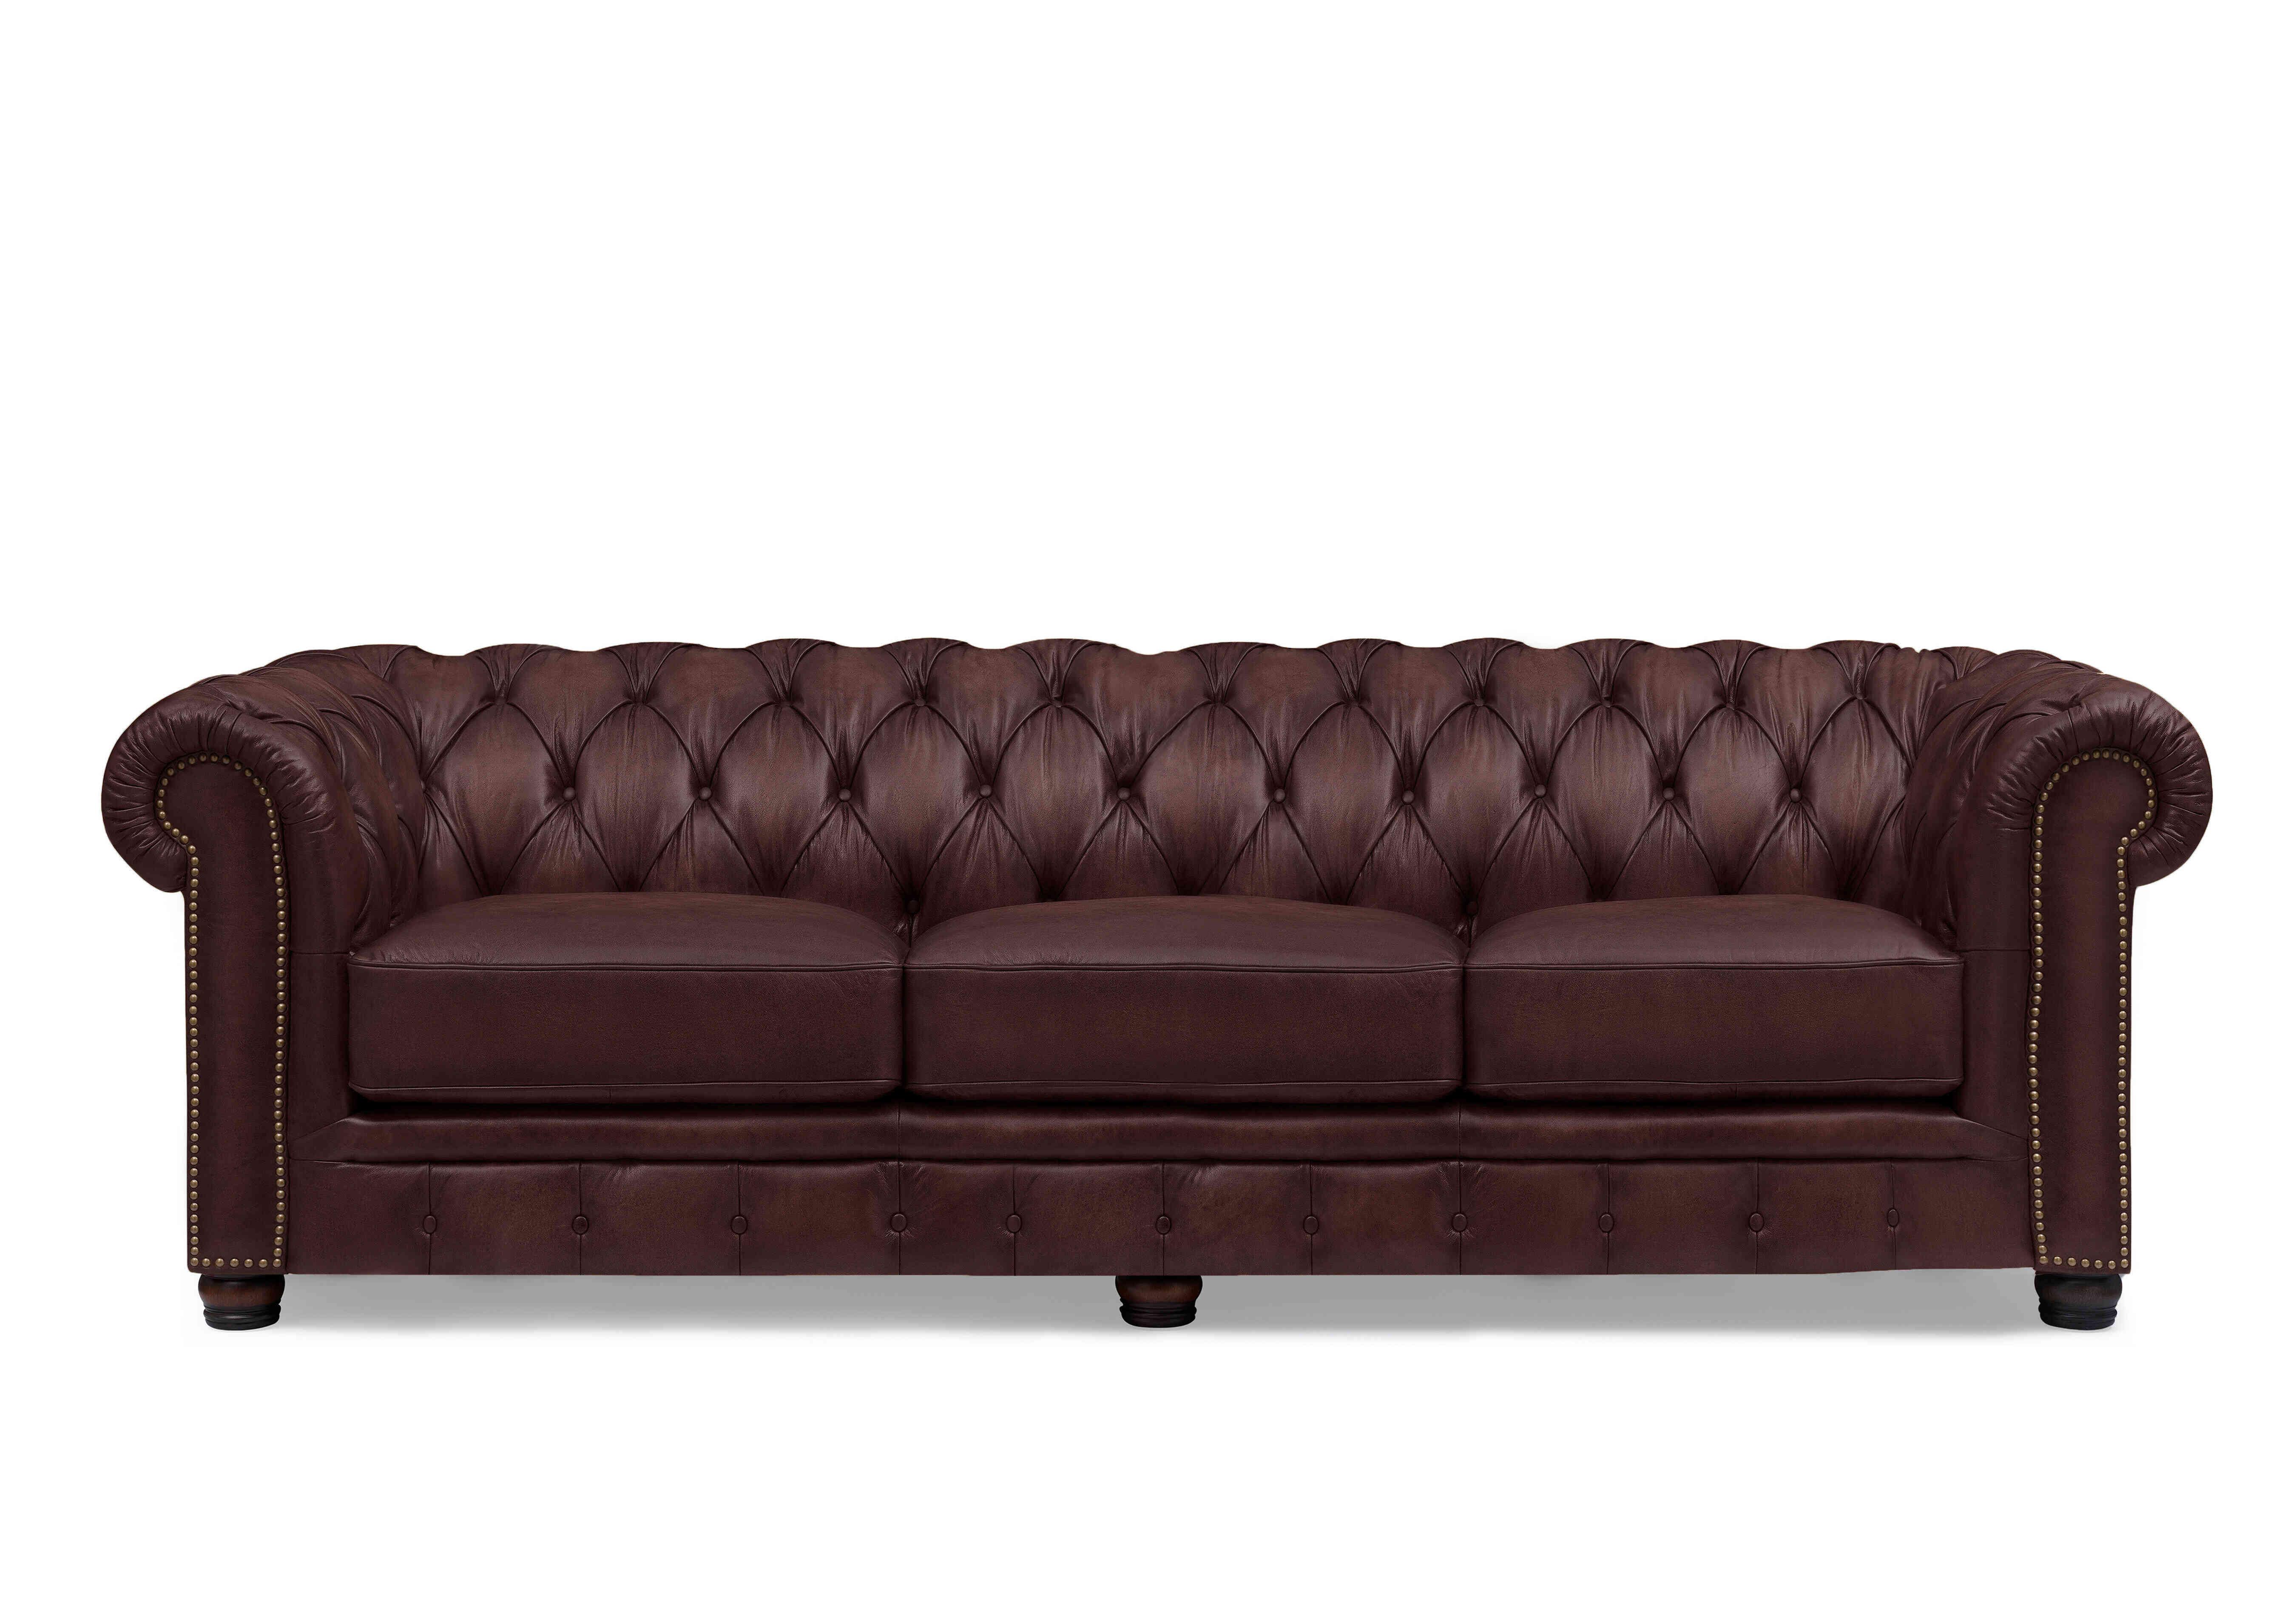 Shackleton 4 Seater Leather Chesterfield Sofa with USB-C in X3y1-1964ls Merlot on Furniture Village